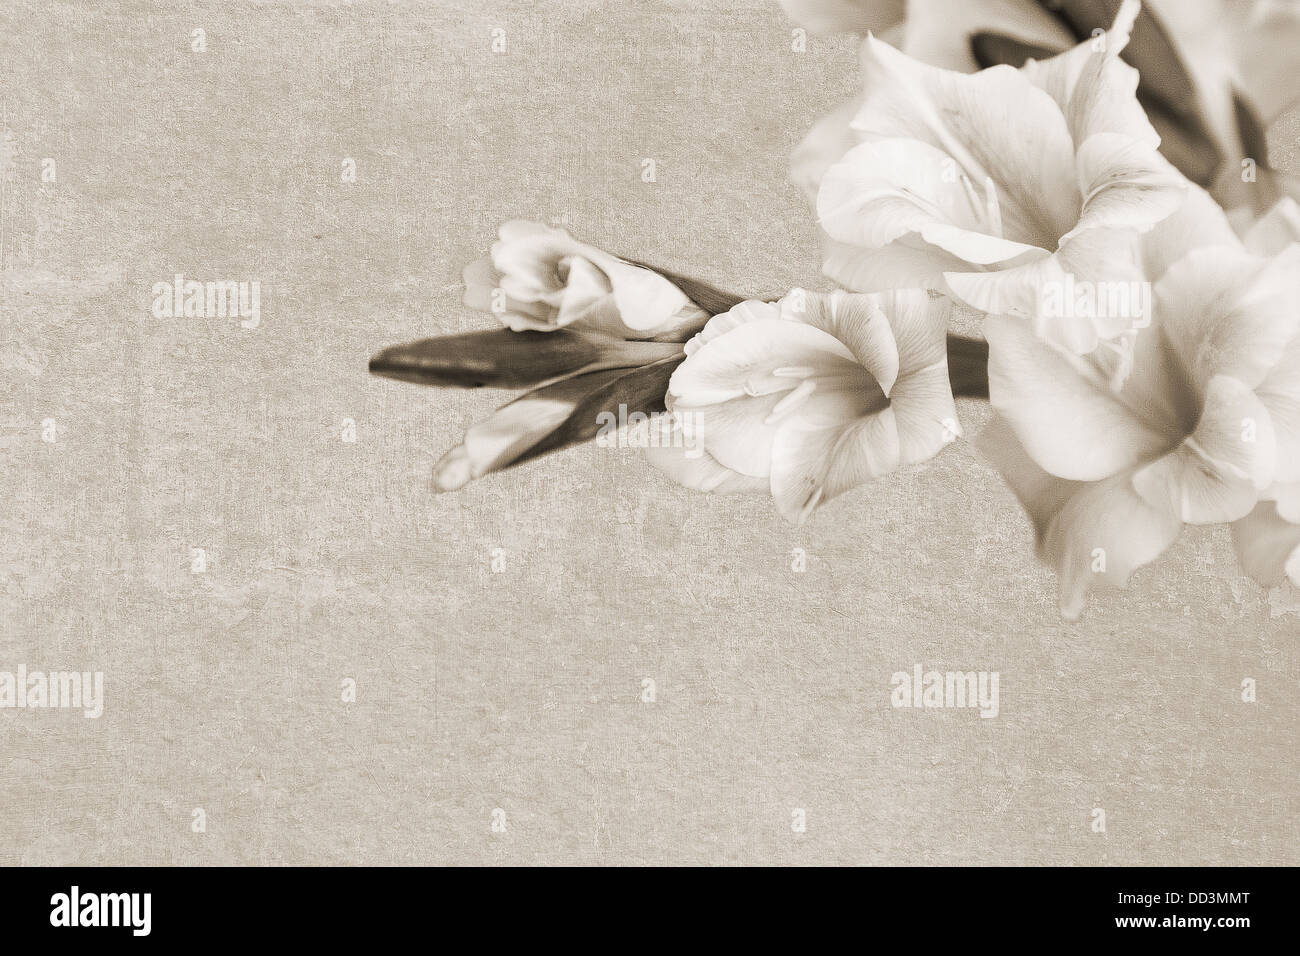 Abstract vintage background with a branch of sword lily flower Stock Photo